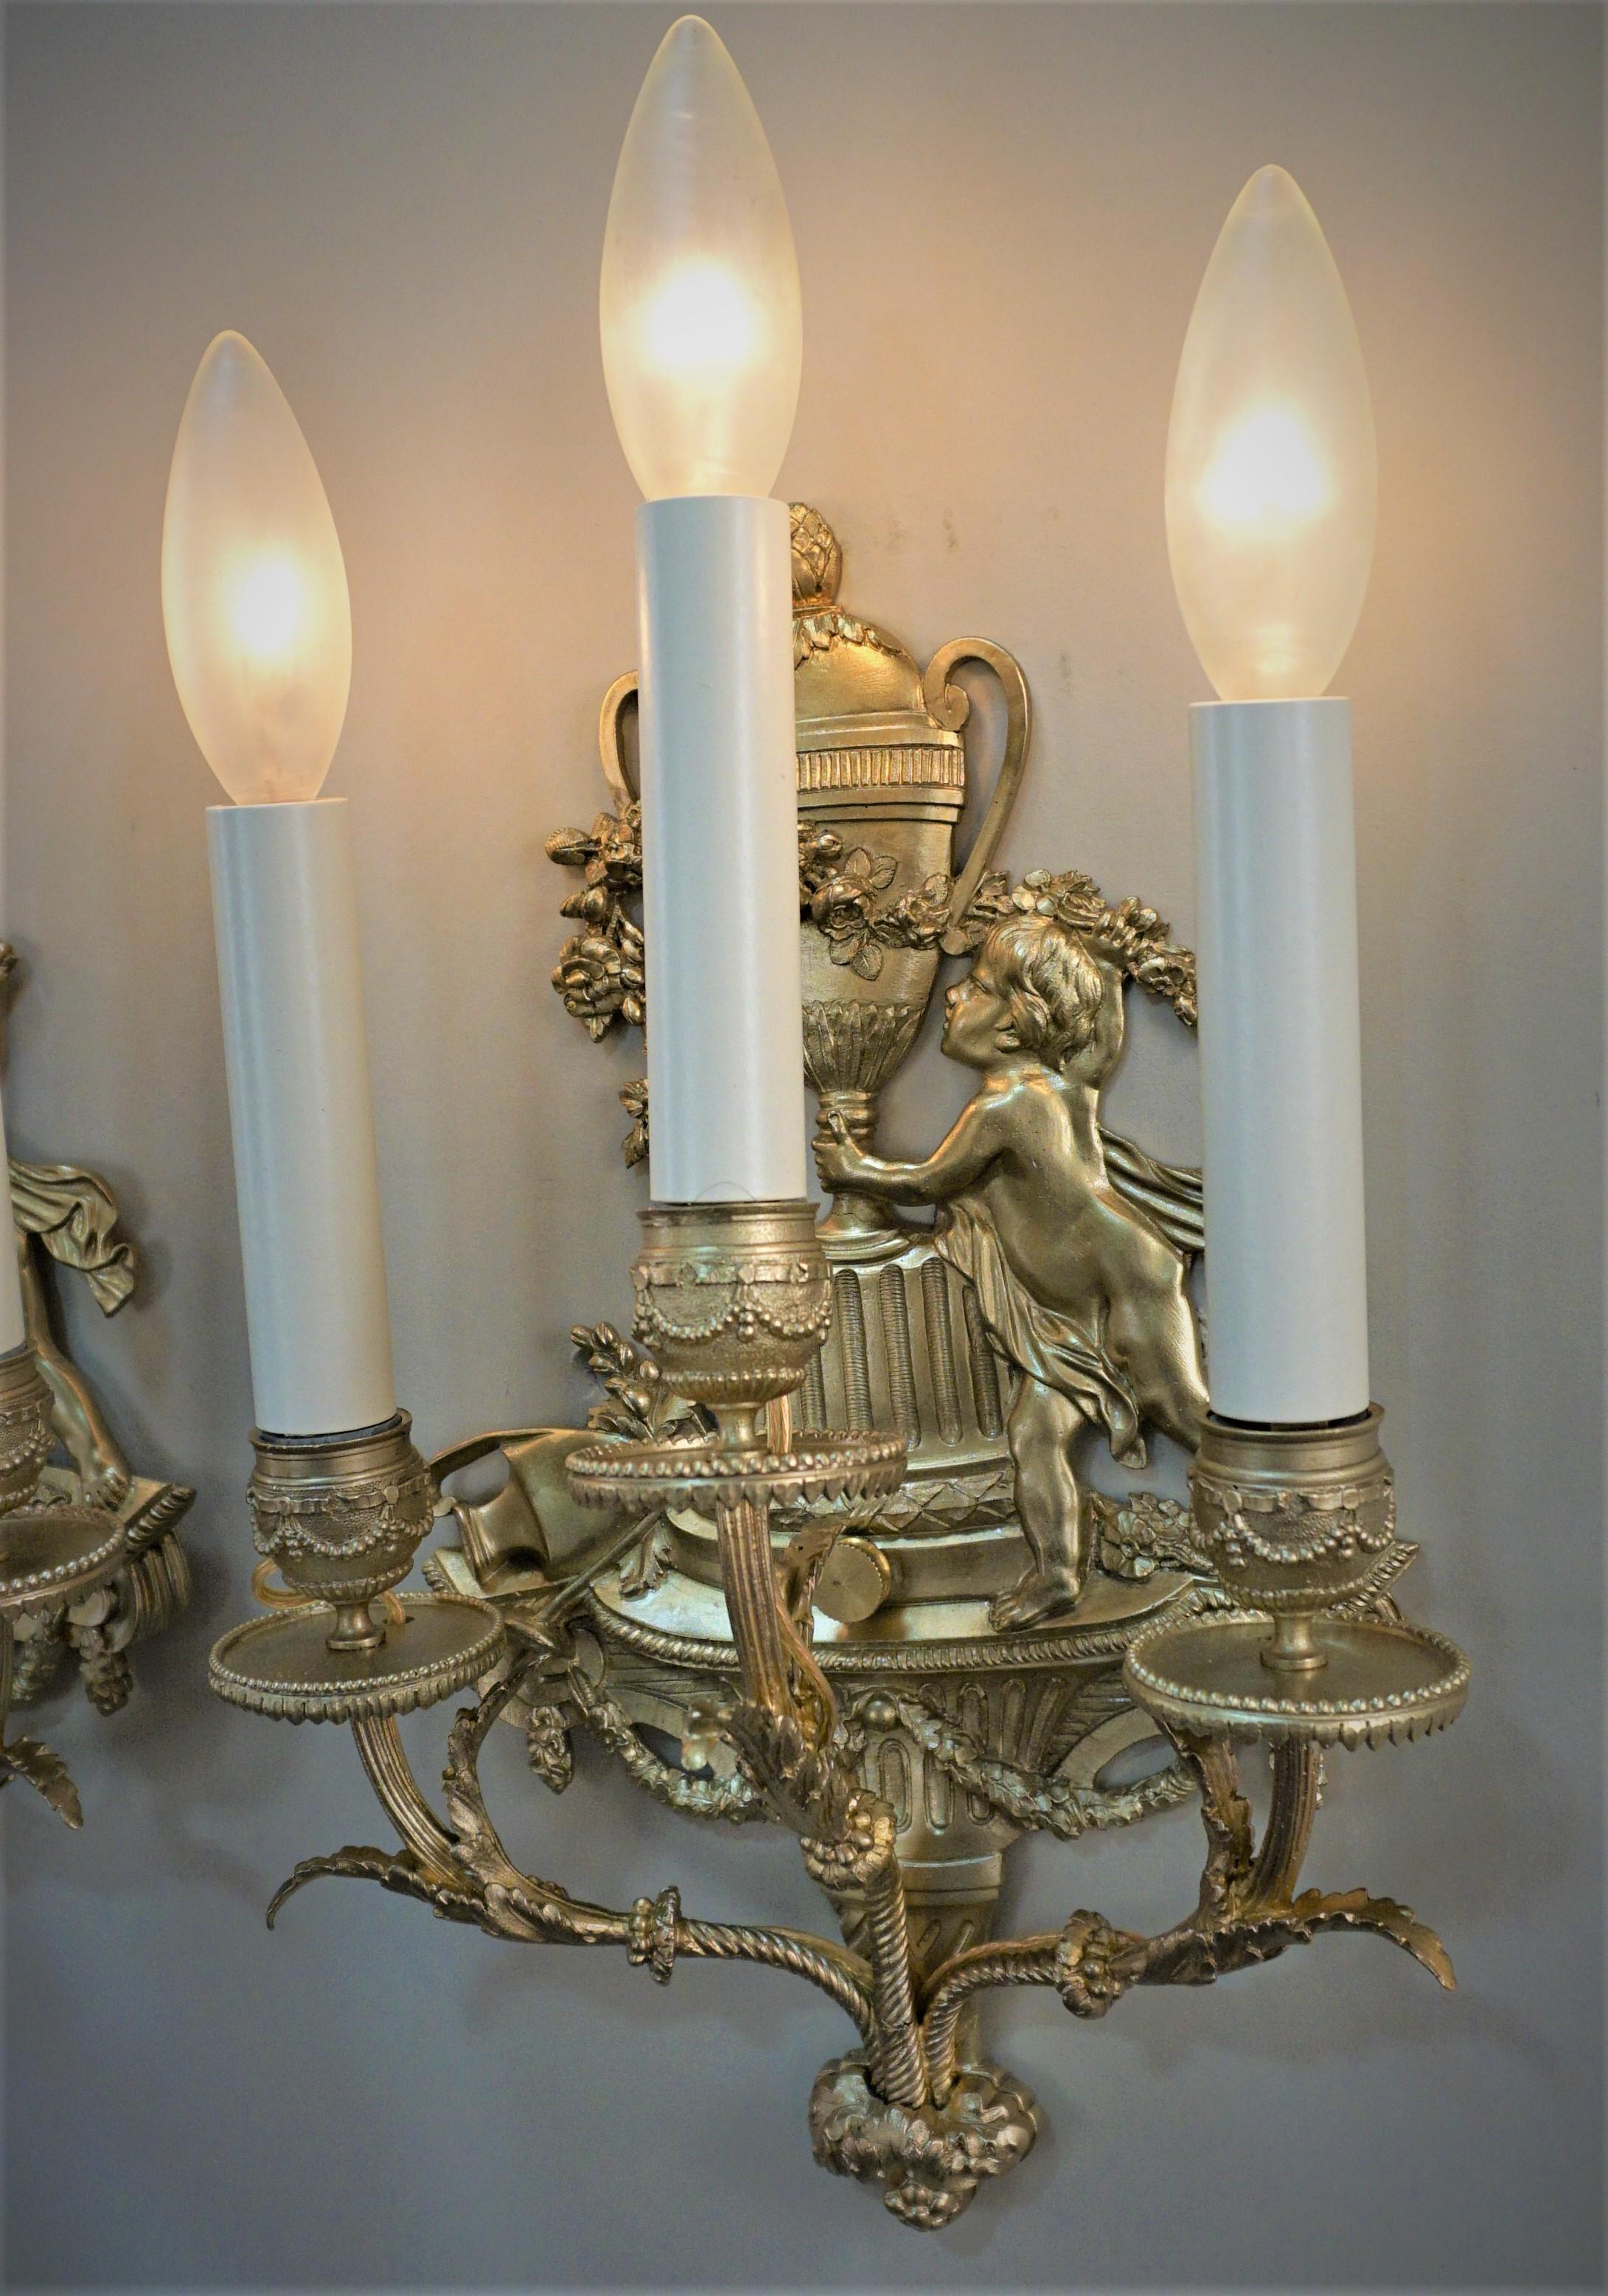 Pair of 19th century candle burning wall sconces that have been professionally electrified and ready for installation.